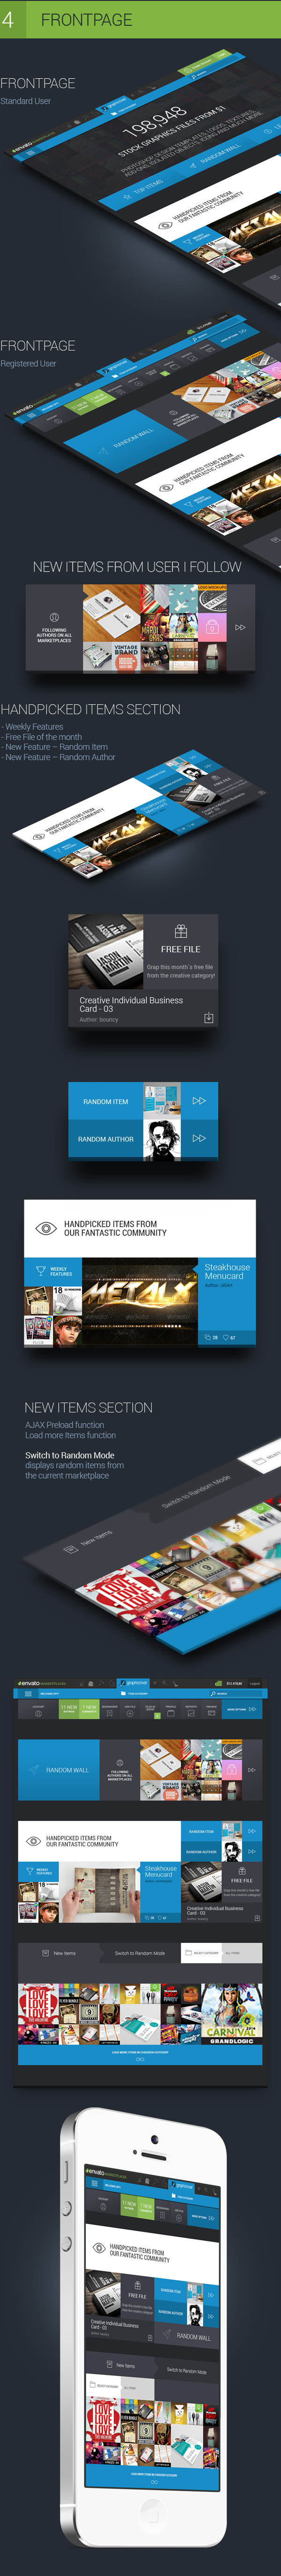 redesign envato themeforest graphicriver UI GUI frontpage features